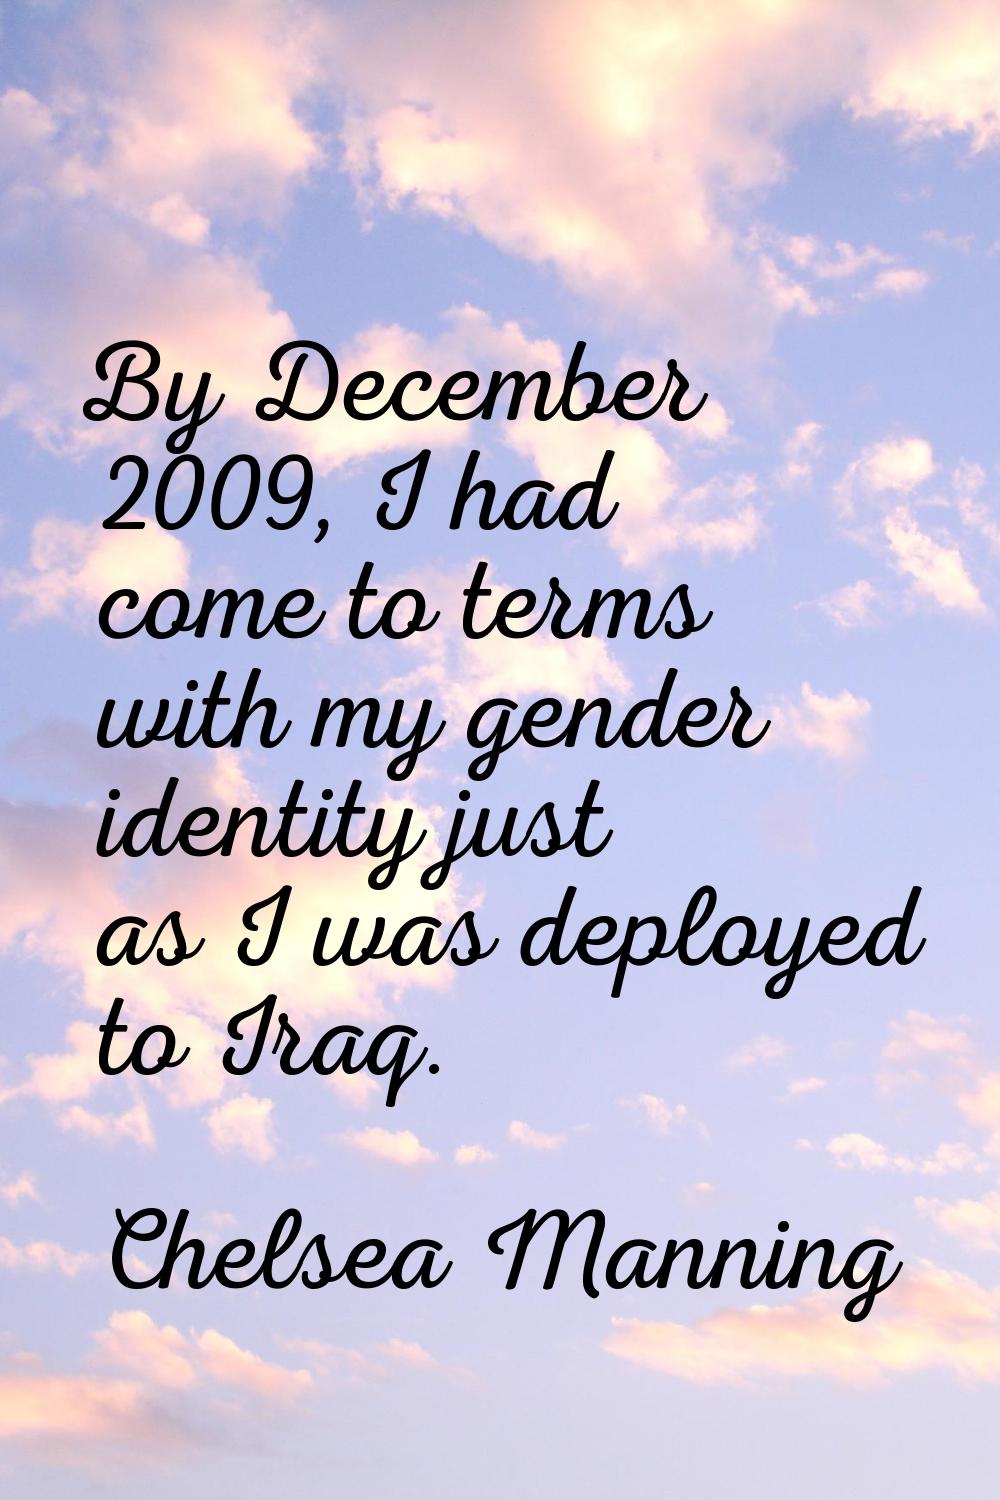 By December 2009, I had come to terms with my gender identity just as I was deployed to Iraq.